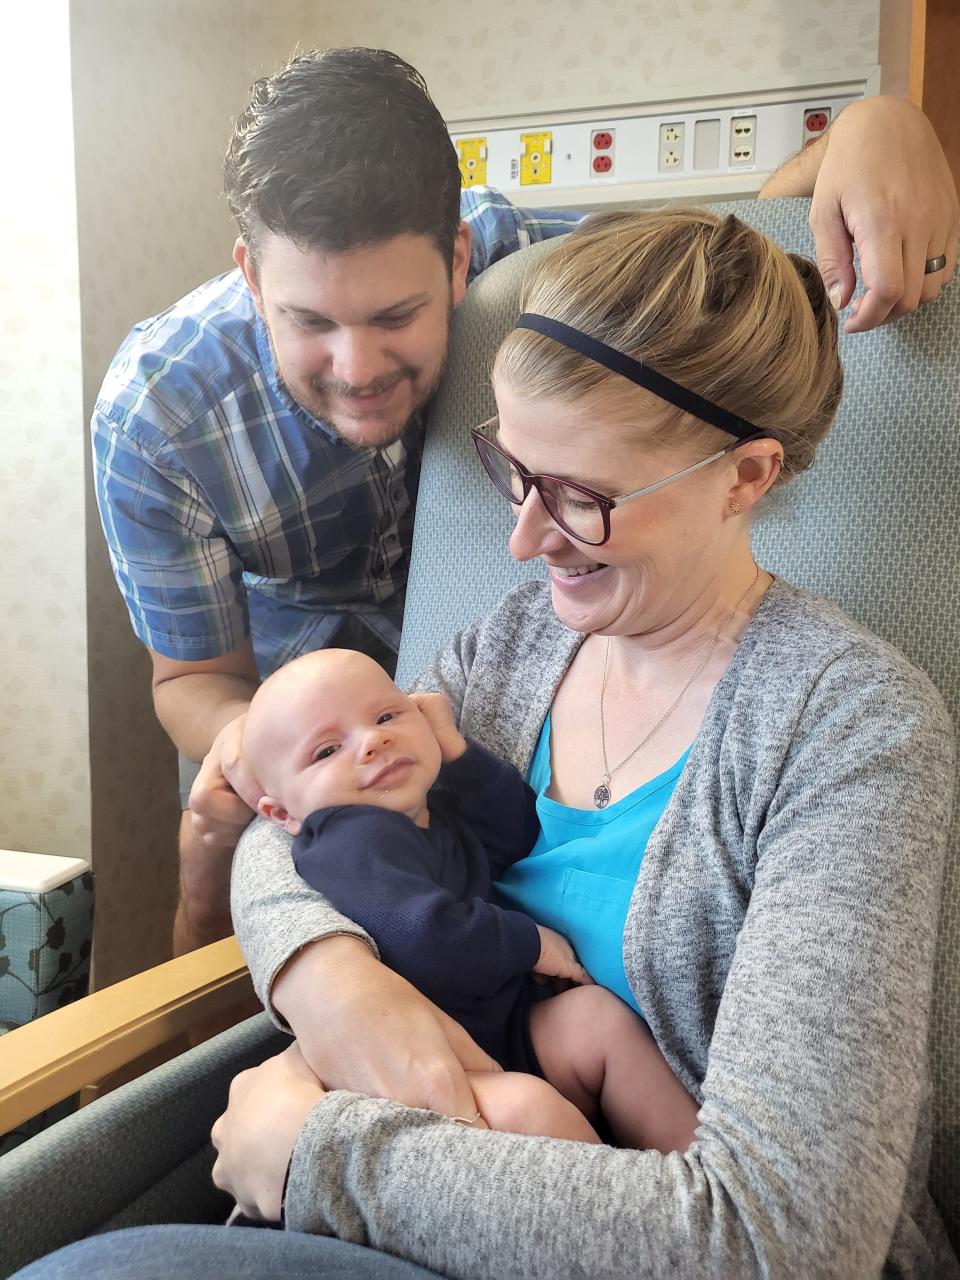 Sarah Hisamoto, 35, gave birth to her son, Gavin, in June as part of Aurora Sinai Medical Center's water birth trial. Her husband, Matt was also very involved in helping Sarah maneuver and keep pushing through four hours of labor.